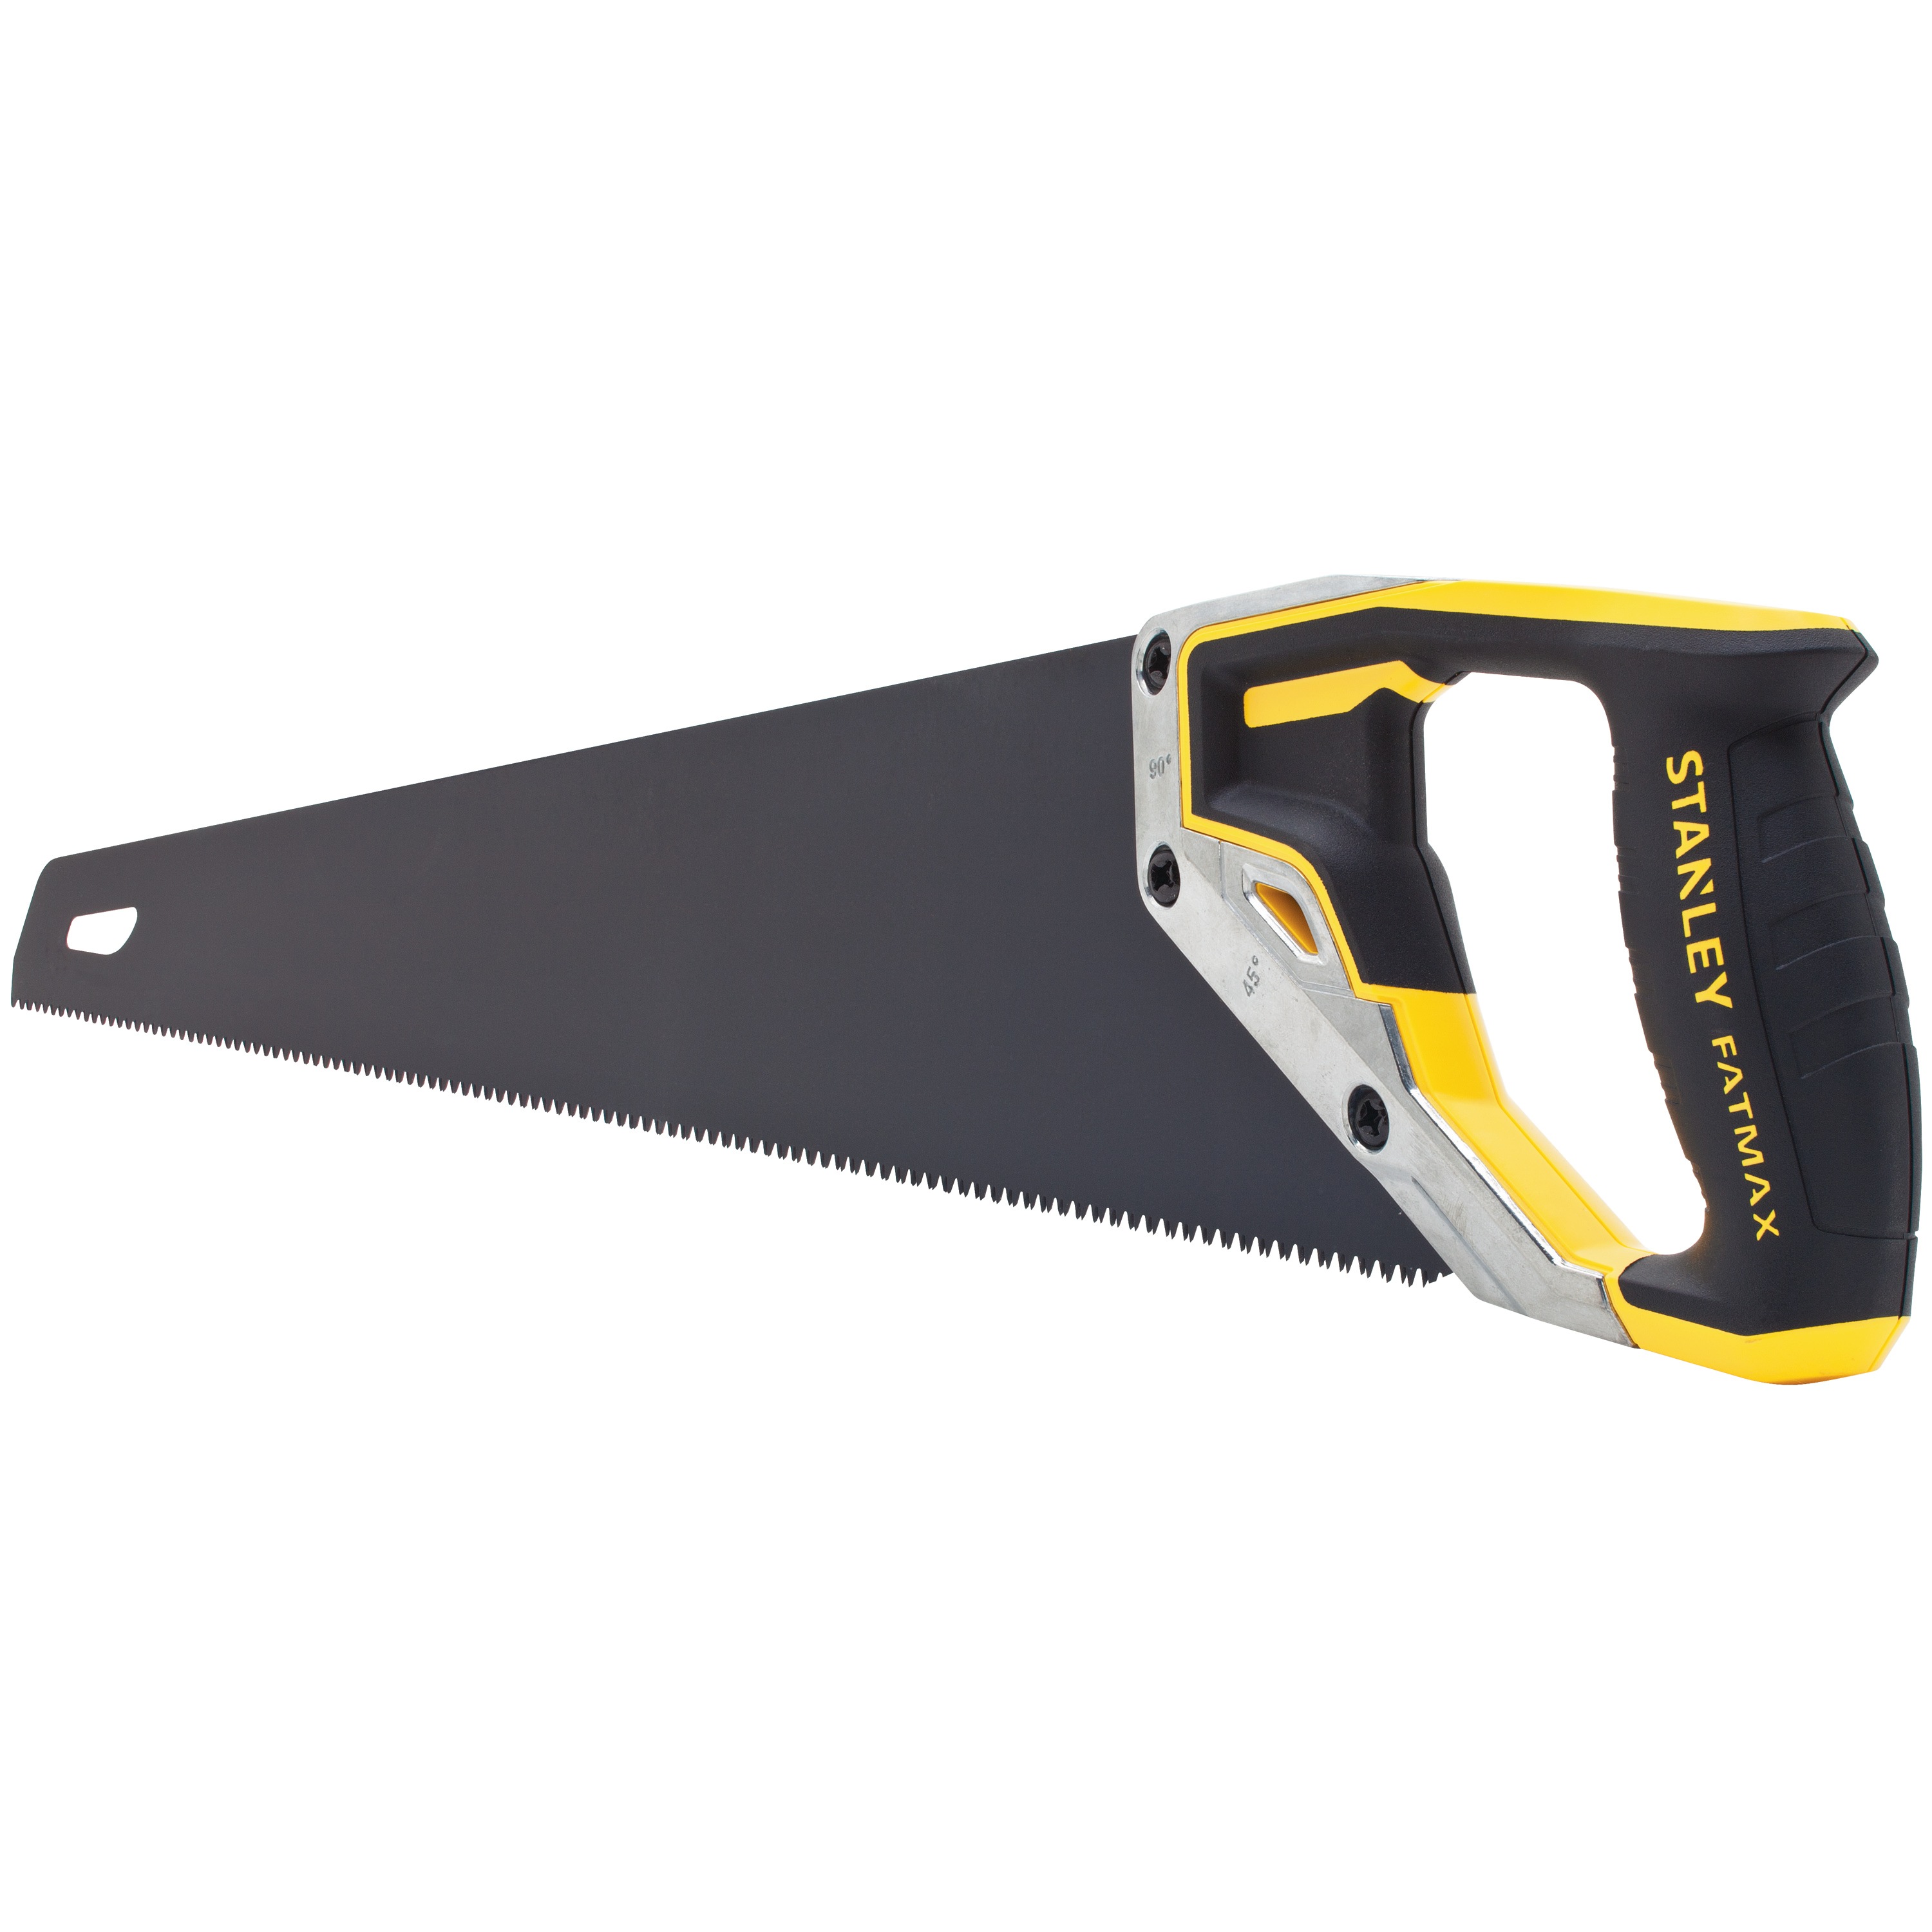 Stanley Tools - 20 in FATMAX TriMaterial Hand Saw - 20-047